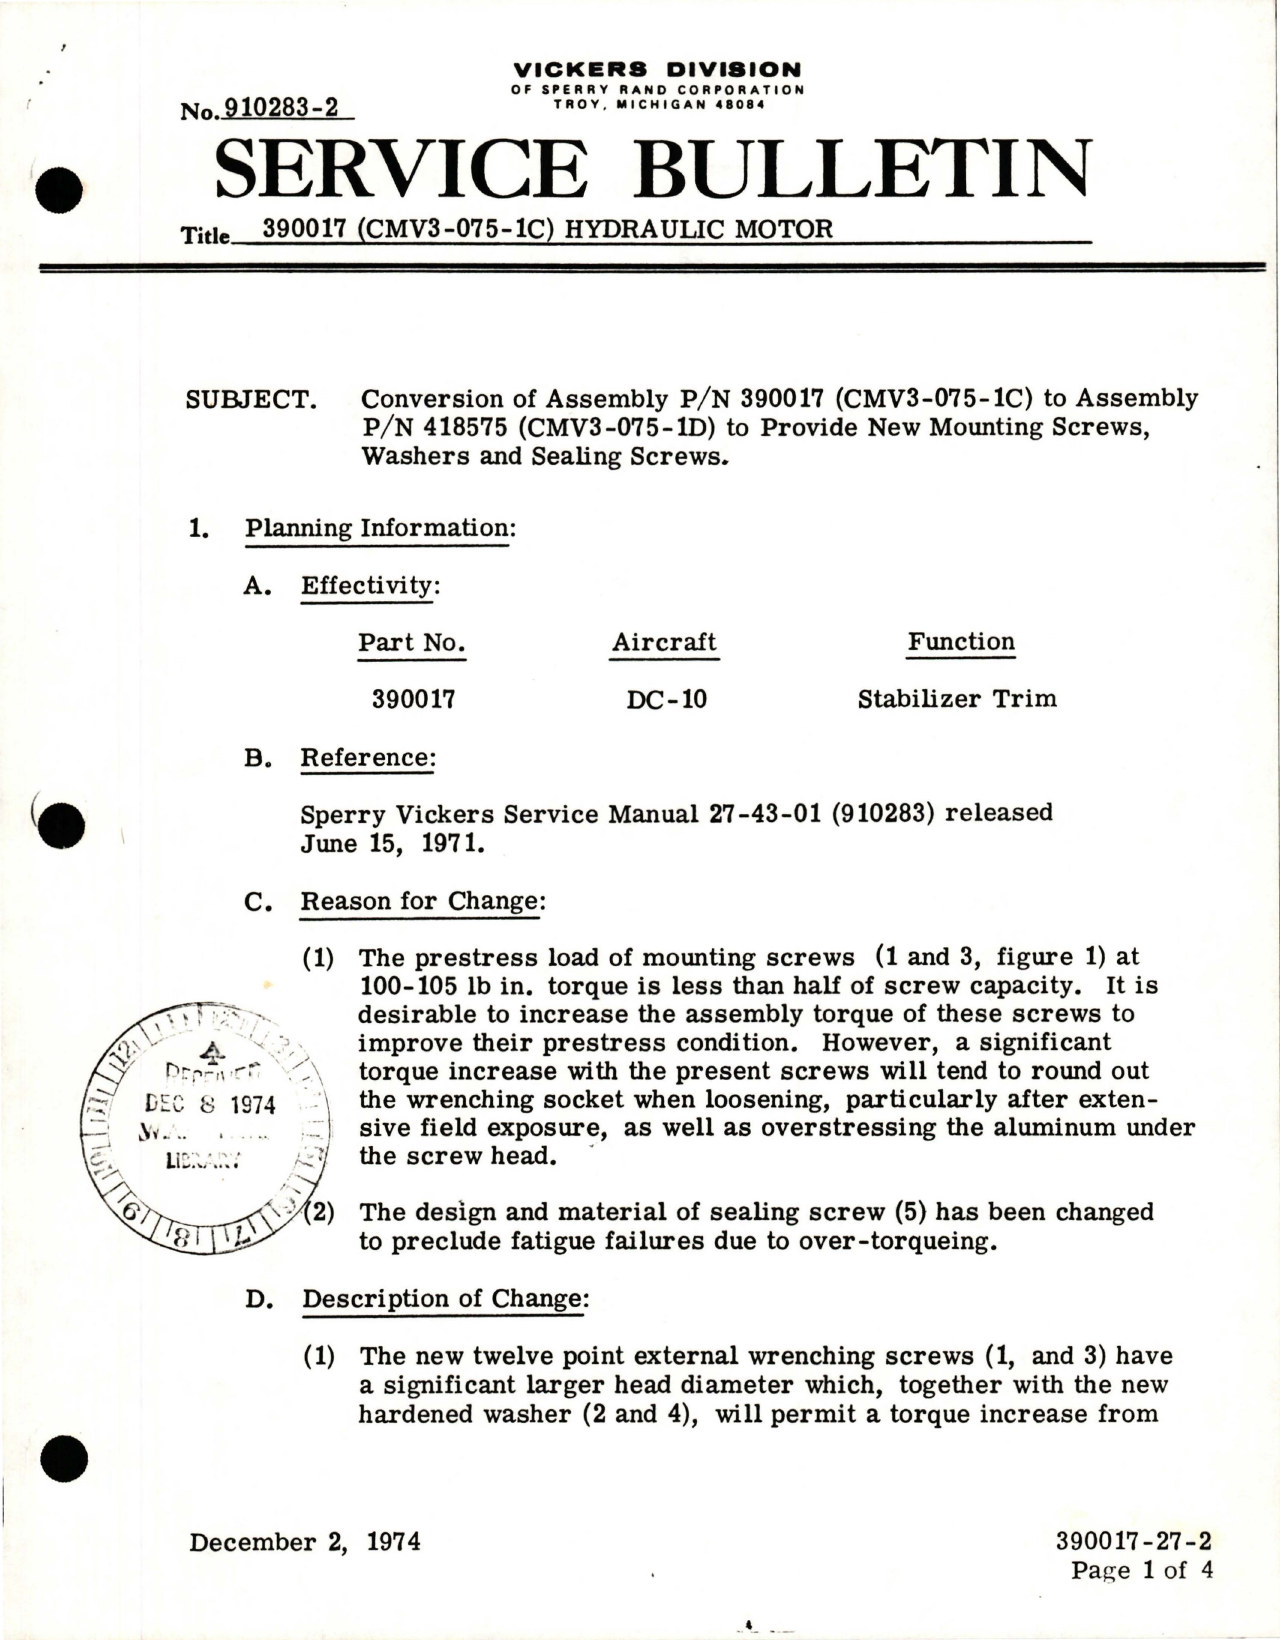 Sample page 1 from AirCorps Library document: Conversion of Assembly 390017 to 418575 - Hydraulic Motor